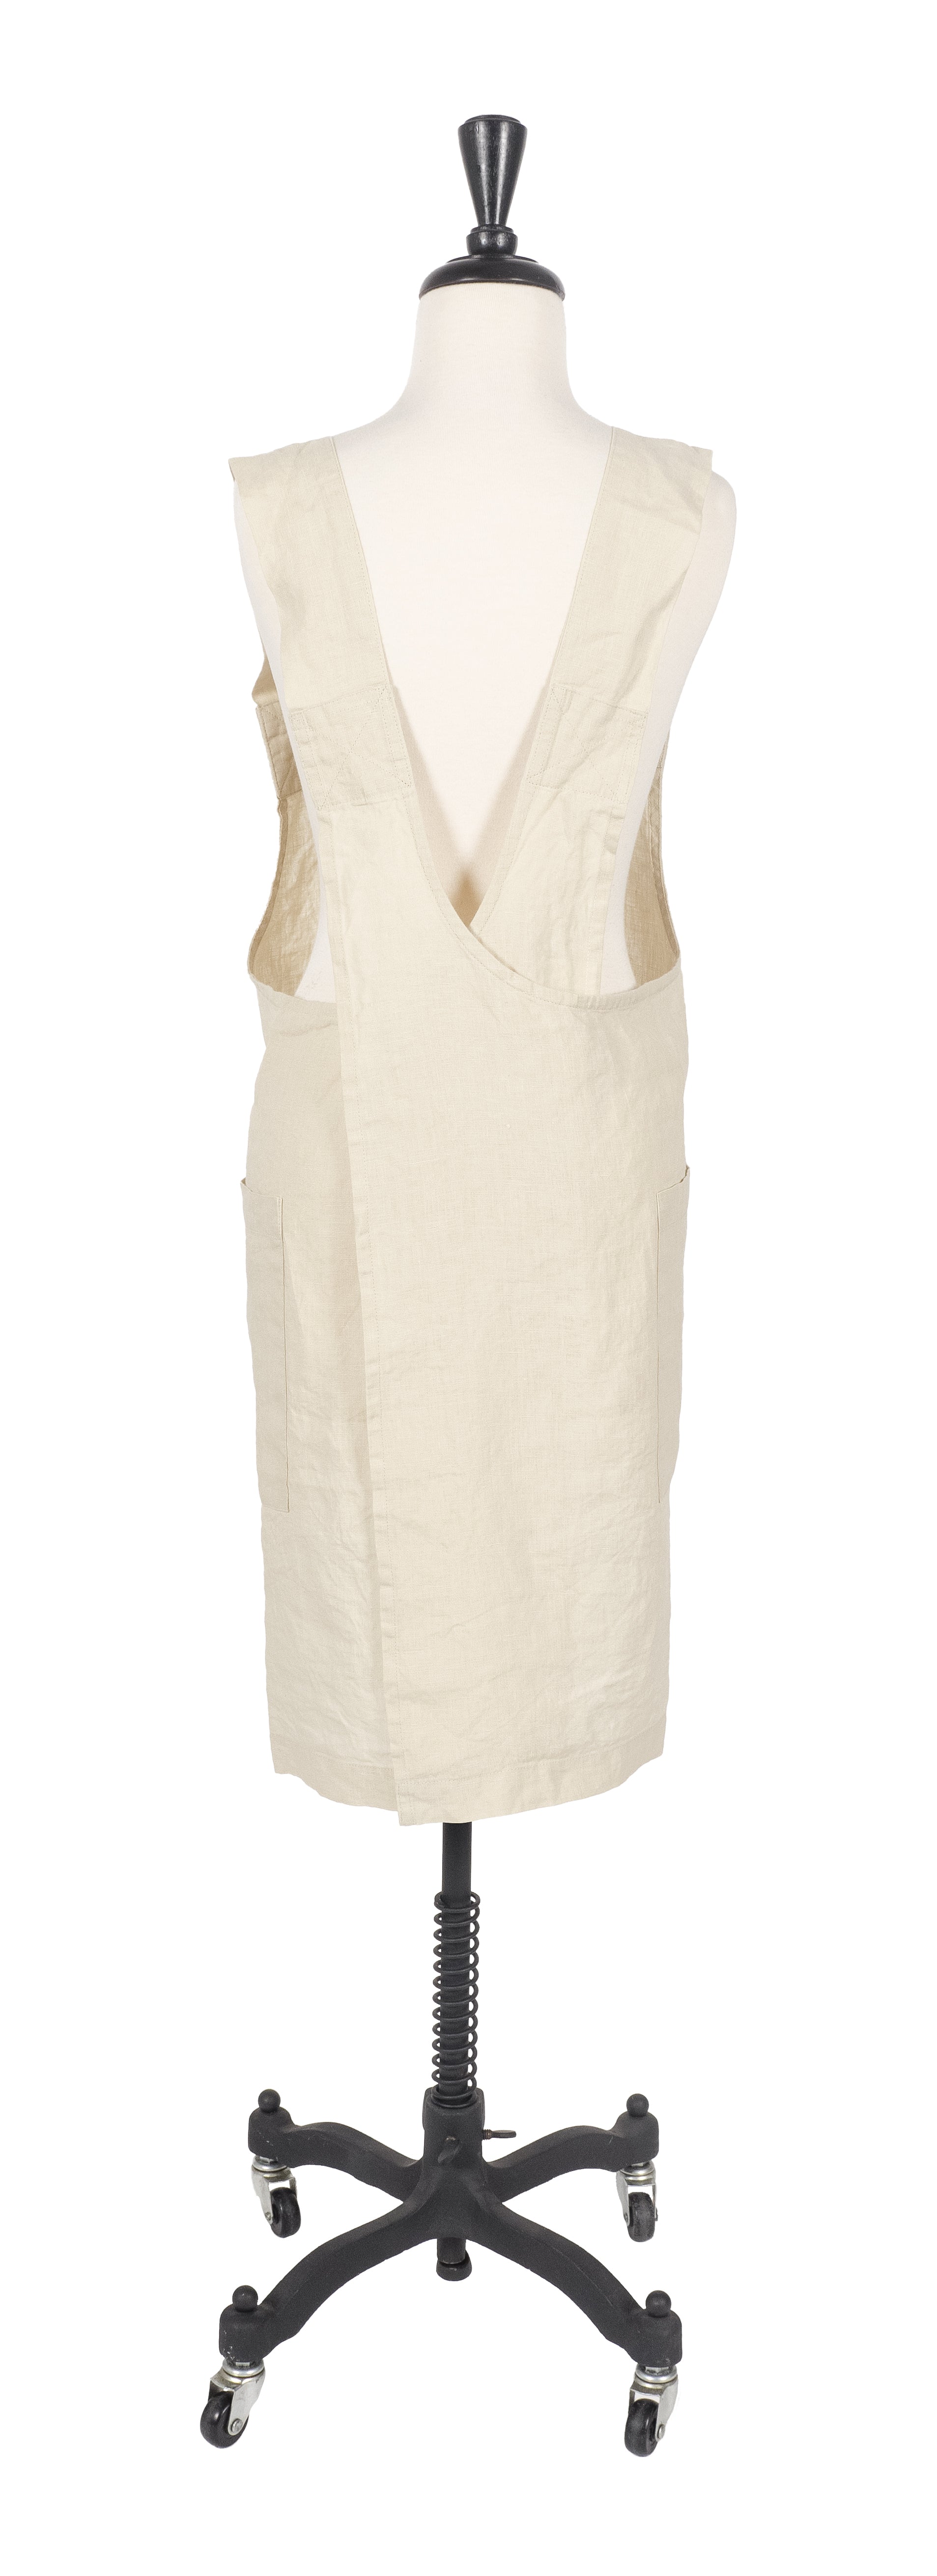 Cross Back Cotton Apron - Short smock apron with relaxed fit, no tie – Shop  Our Favorites